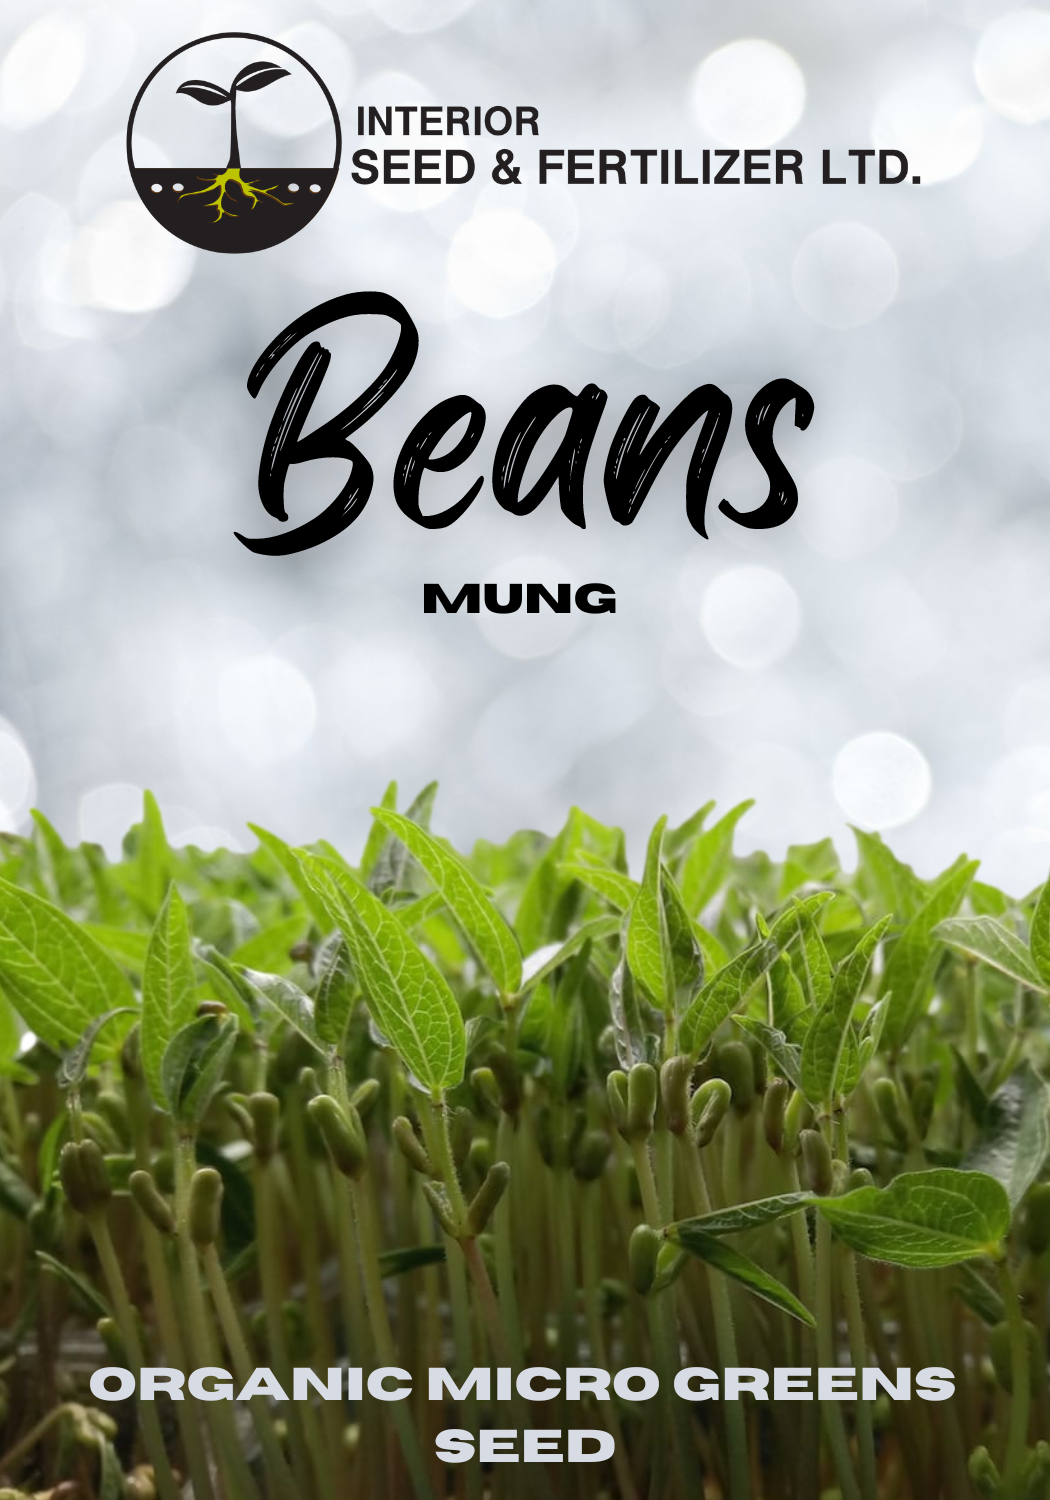 Mung Beans Organic Microgreens. These petite greens boast a mild, fresh flavor that pairs well with a variety of dishes. From Interior Seed and Fertilizer Garden Center and Nursery Cranbrook, BC.